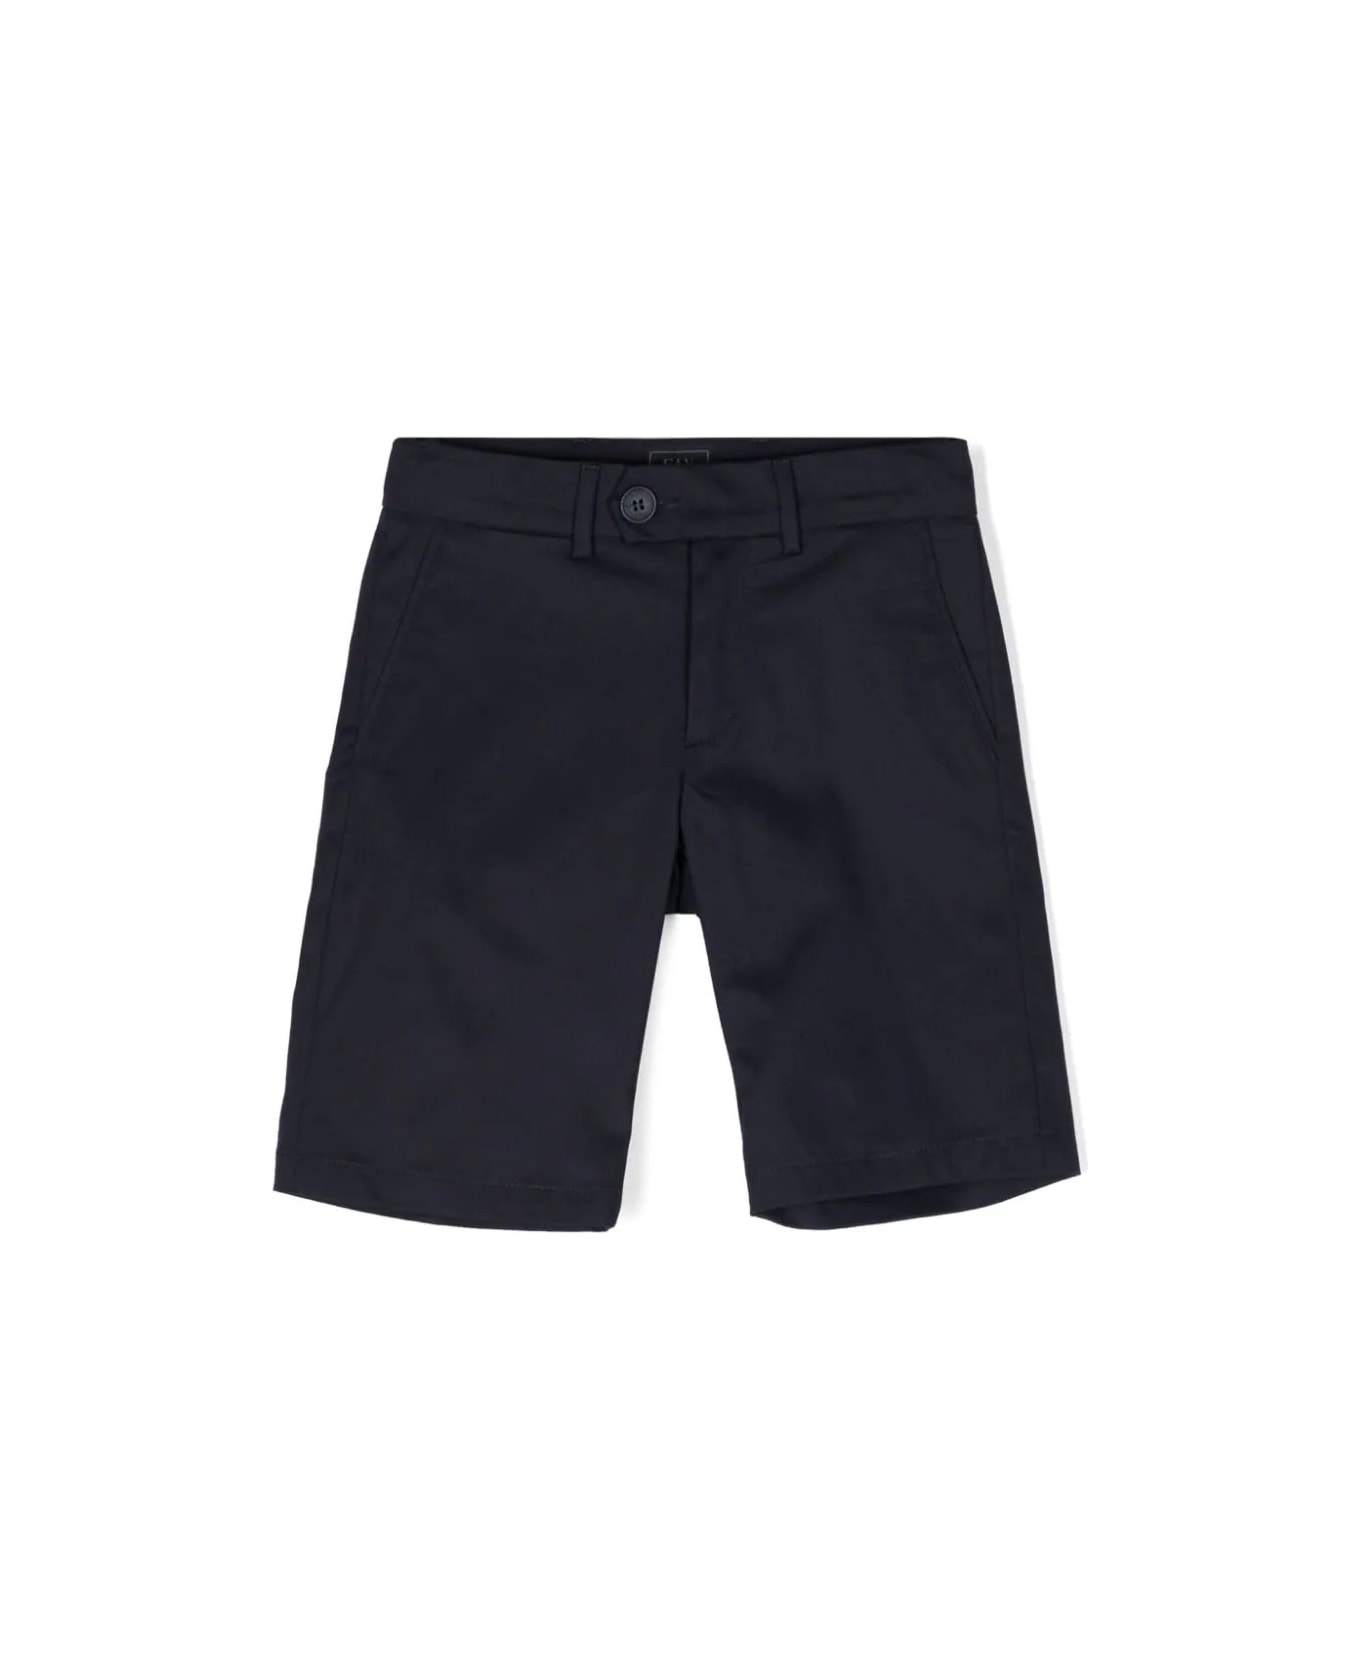 Fay Navy Blue Cotton Blend Tailored Bermuda Shorts - Blue ボトムス